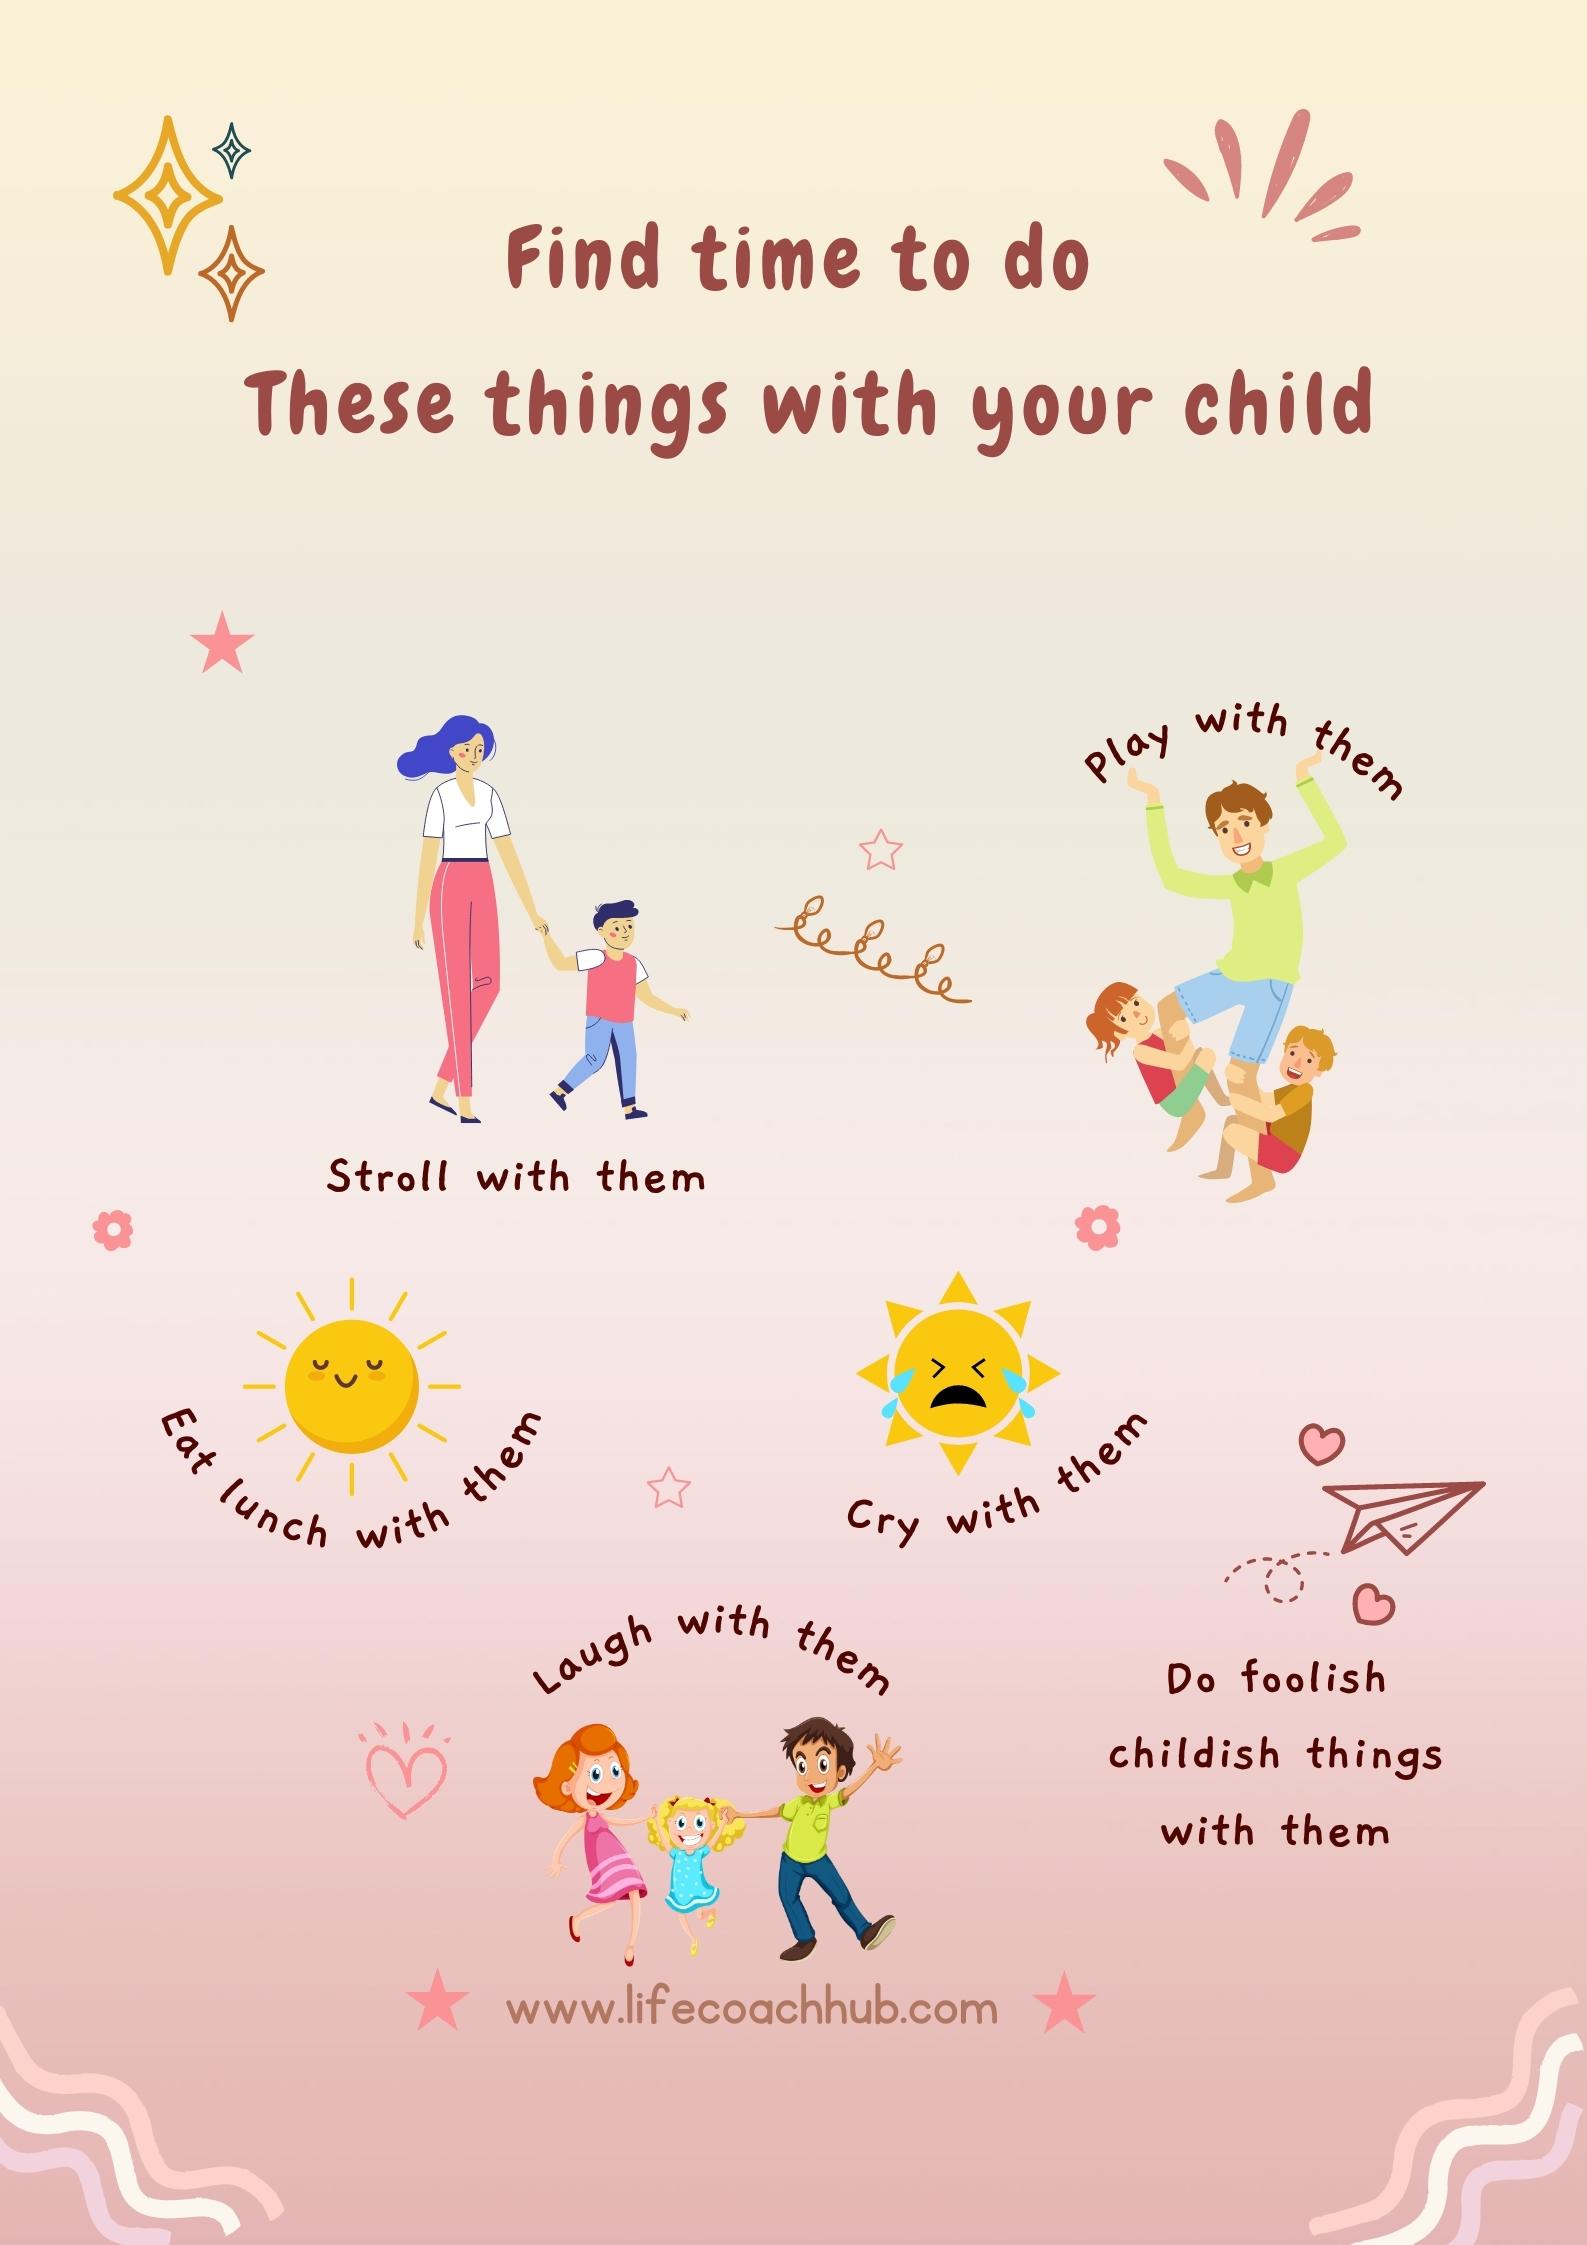 Find time to do things with your child